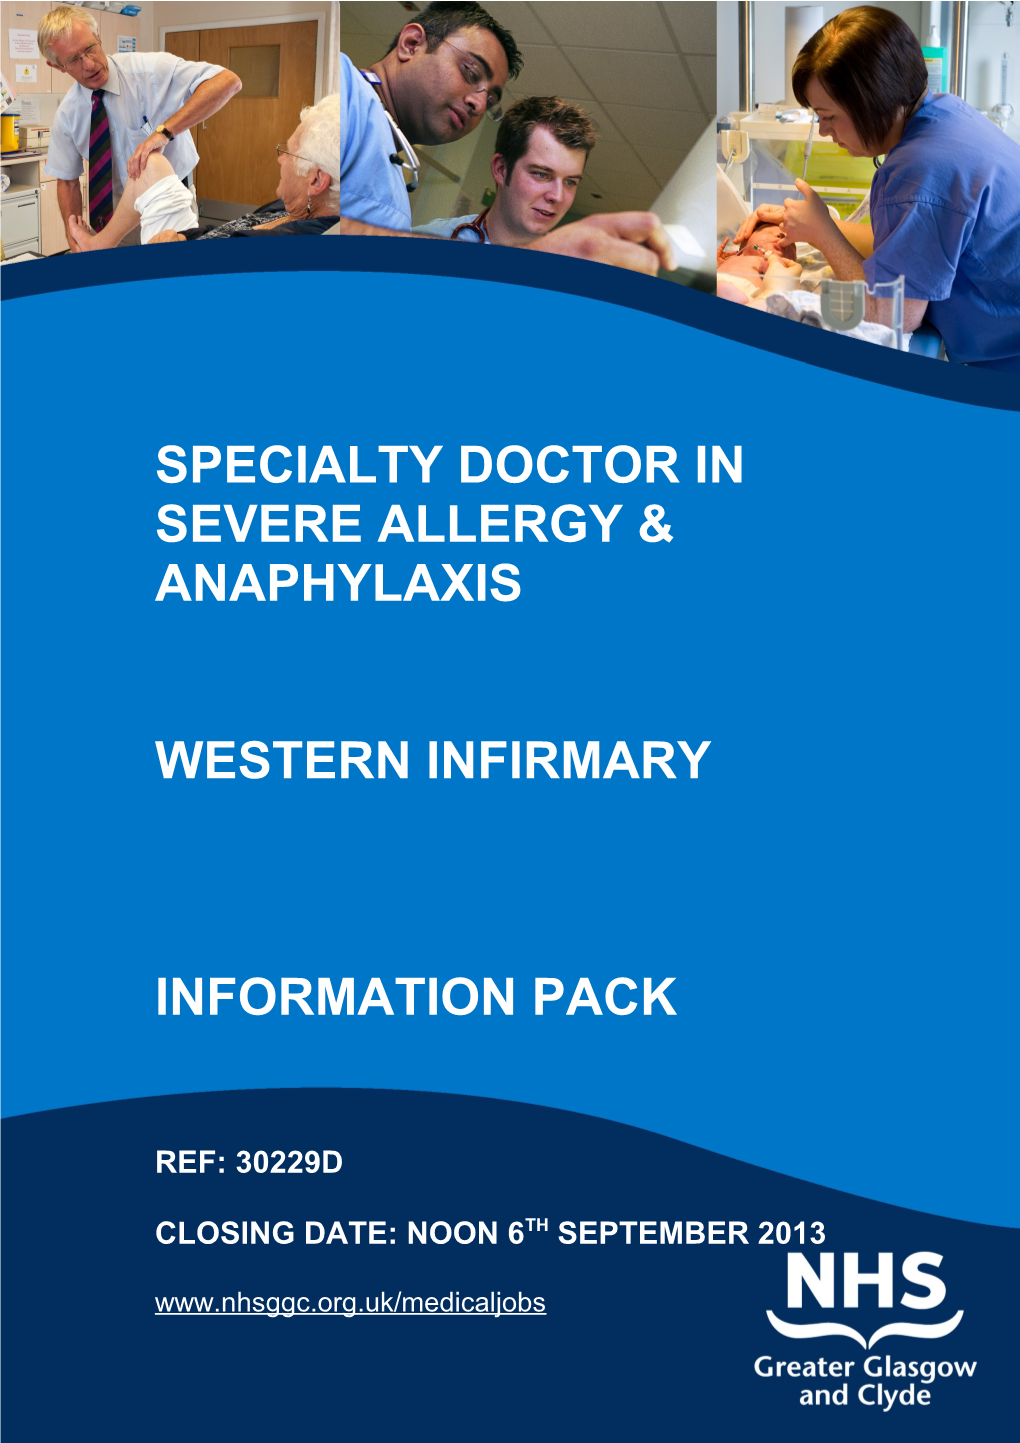 Specialty Doctor in Severe Allergy & Anaphylaxis